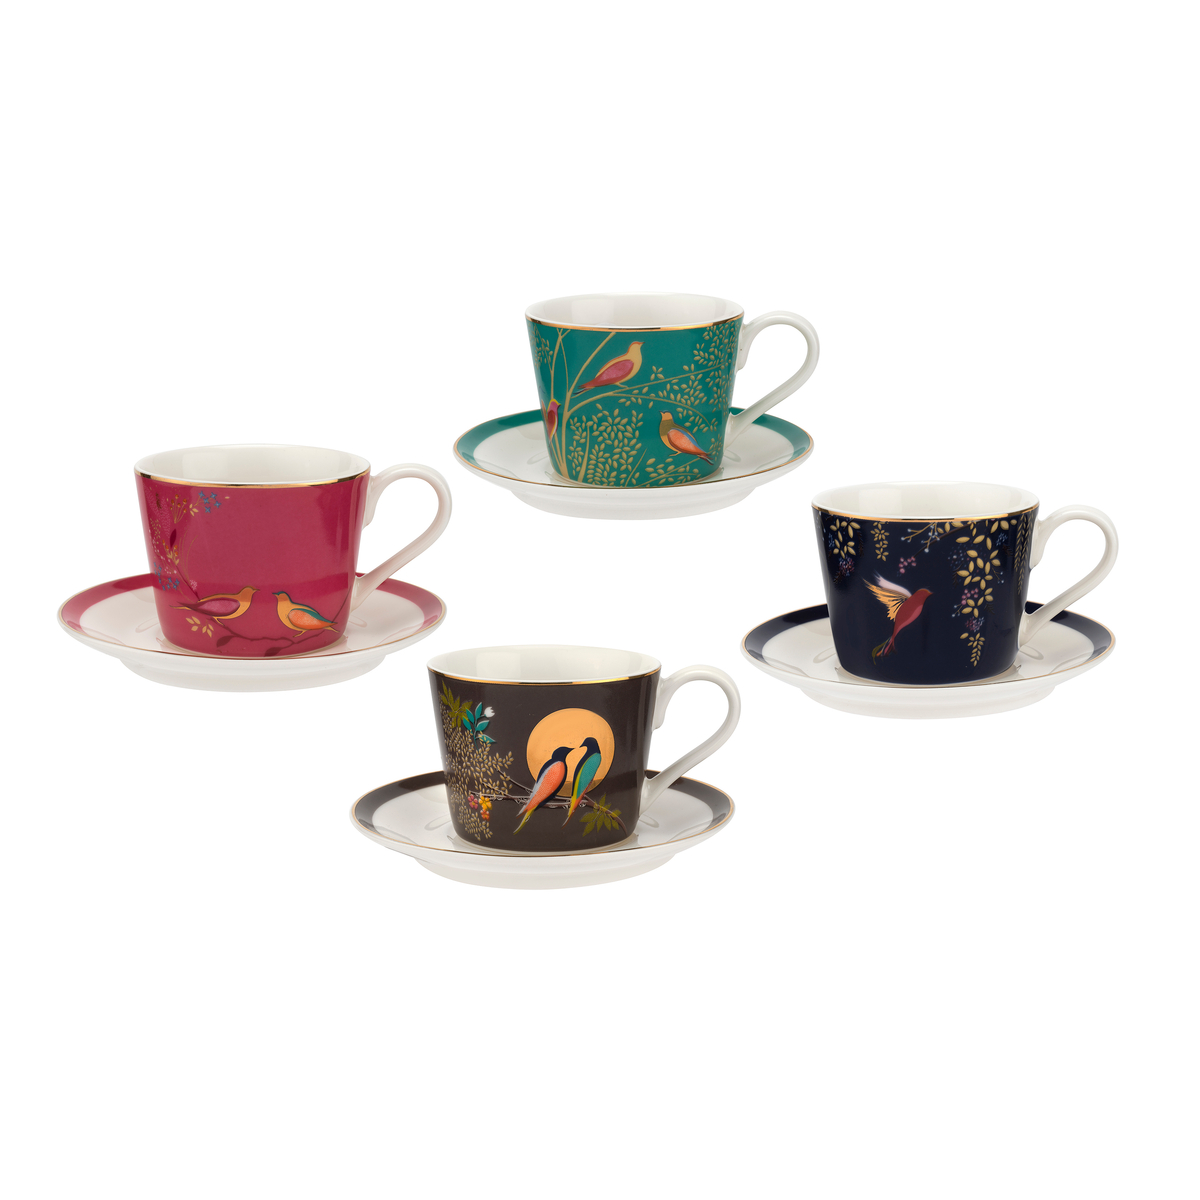 Sara Miller Chelsea Espresso Cups and Saucers